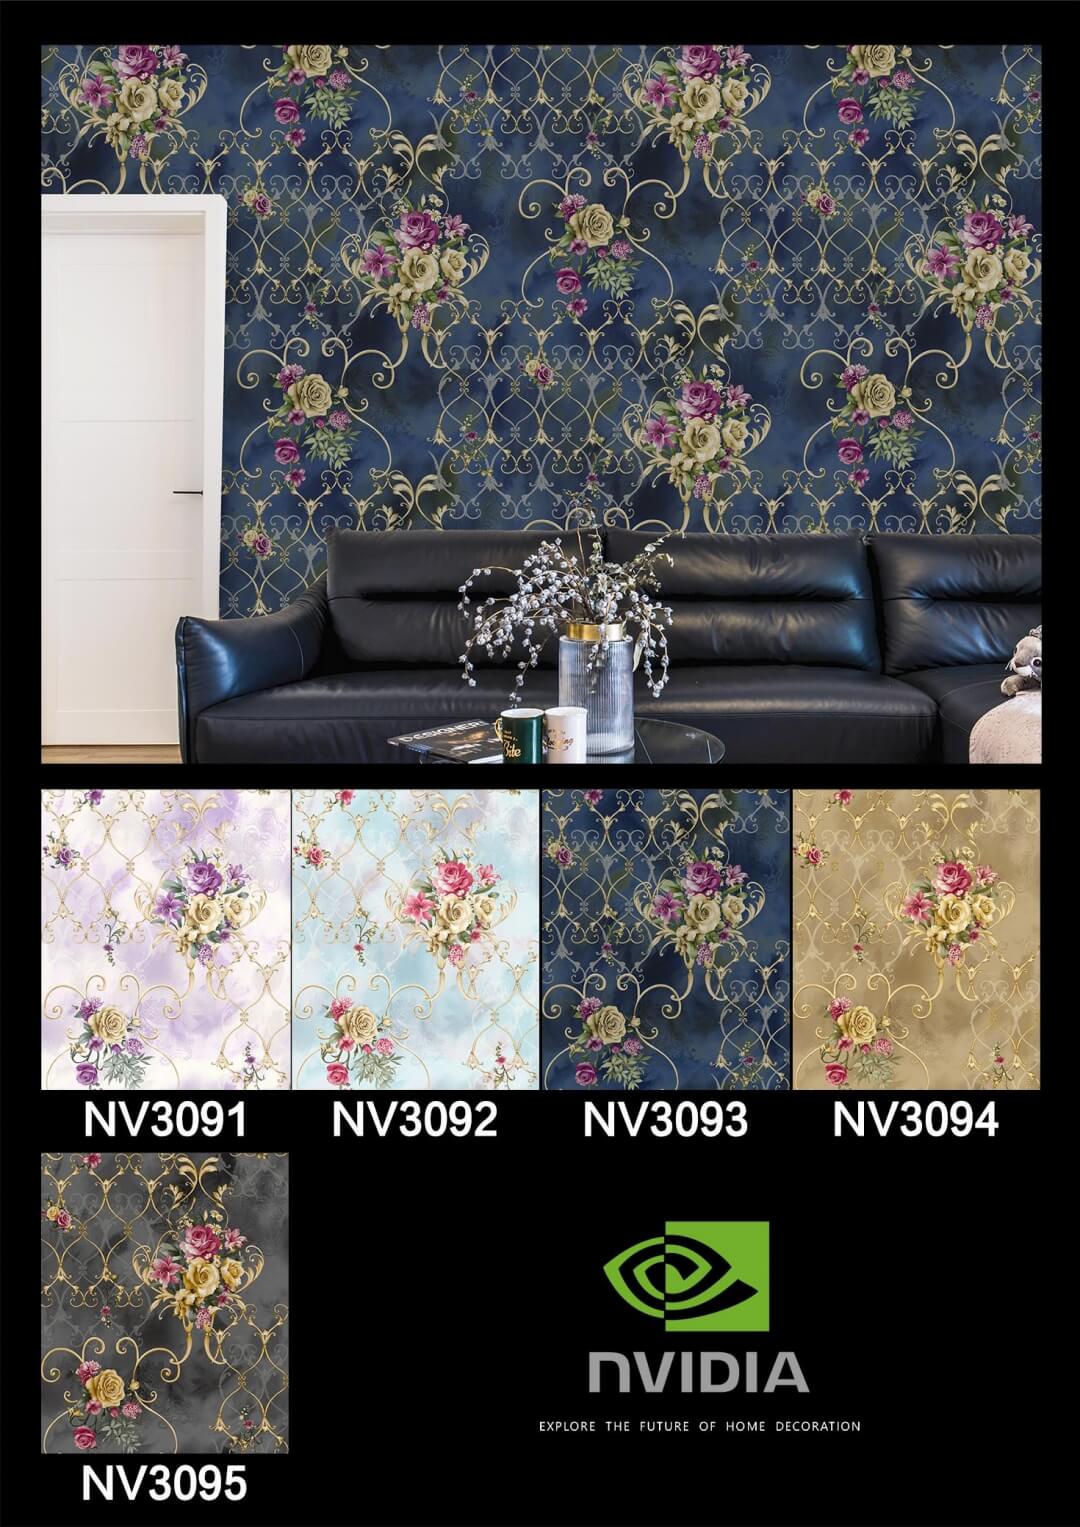 3D Waterproof Home Wallpaper at Lowest Price (5)